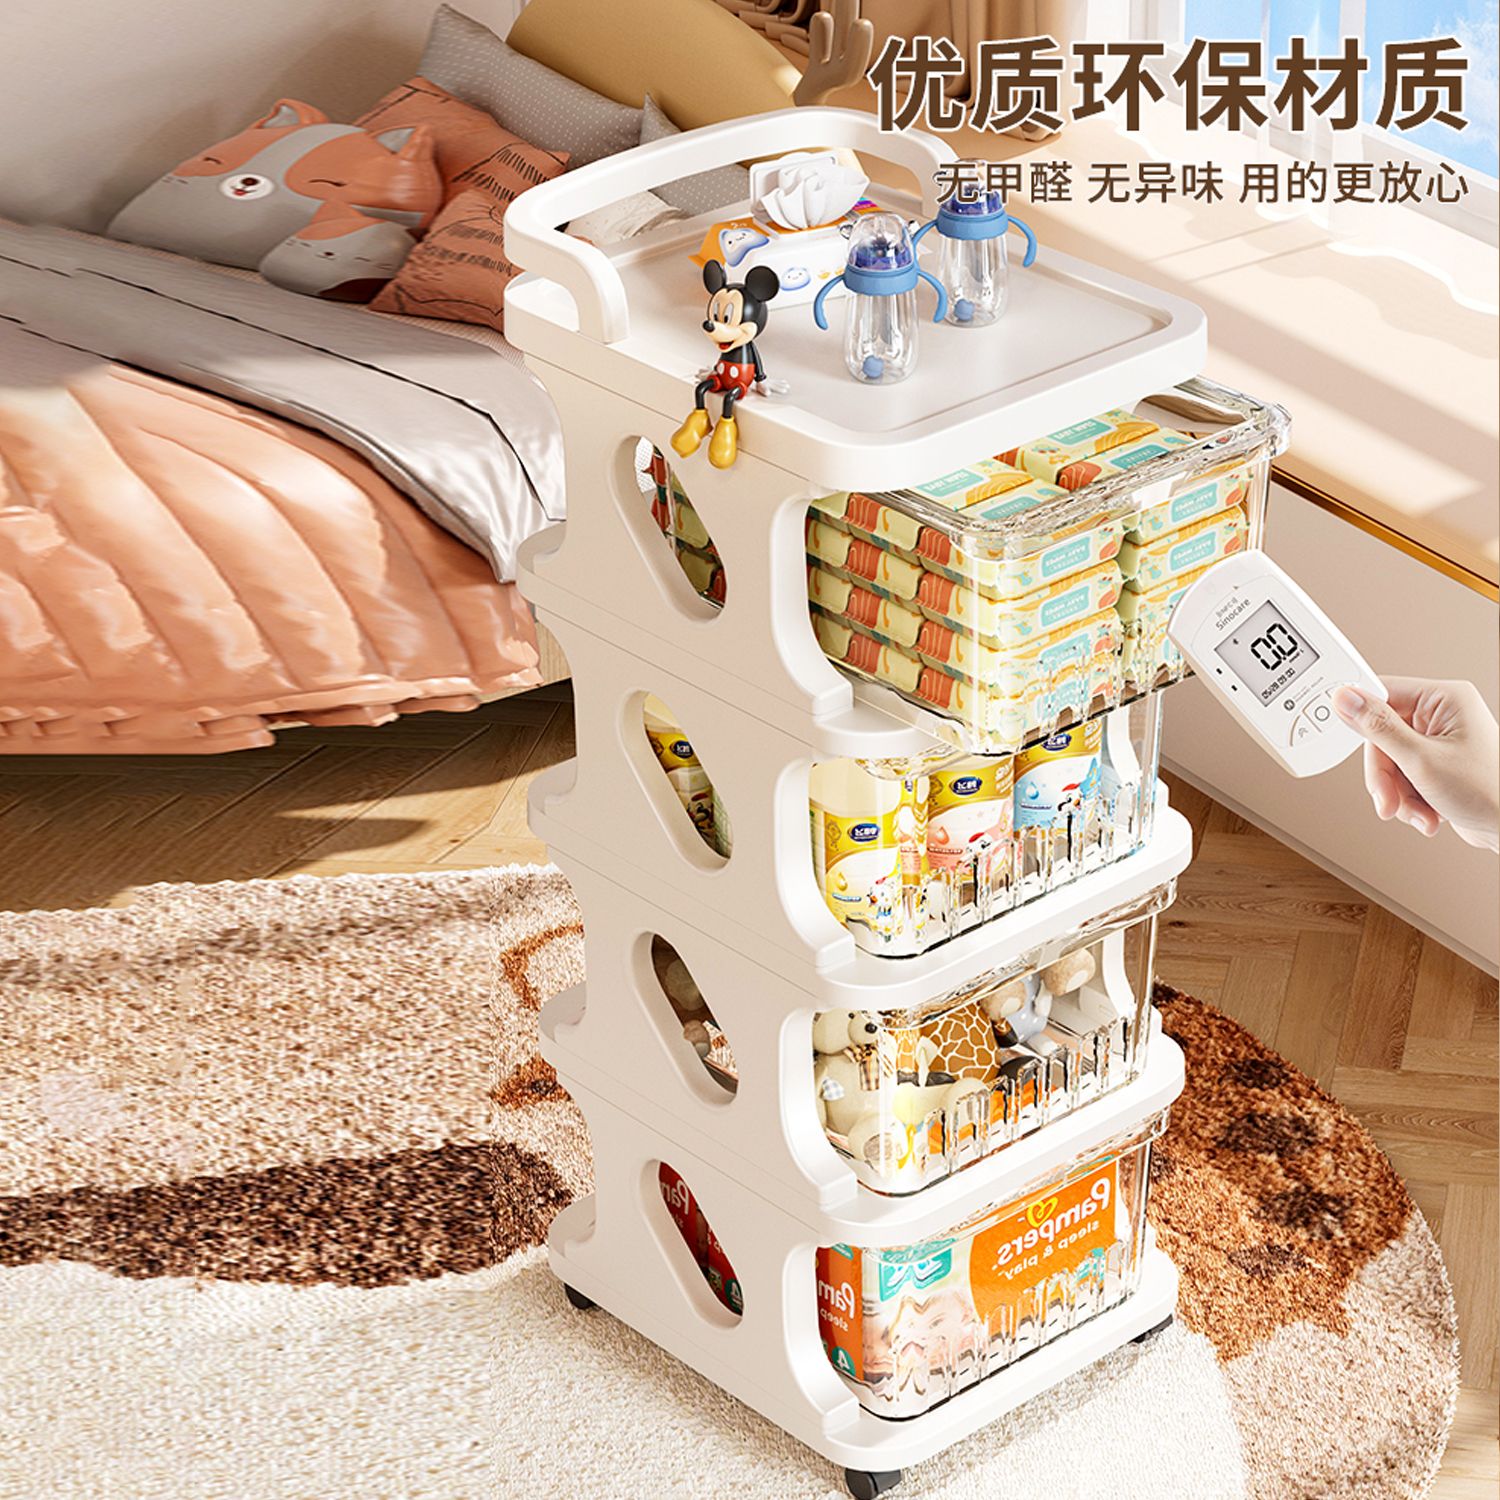 Anyabang stroller snack rack baby products storage cabinet multi-layer storage rack removable toy storage box